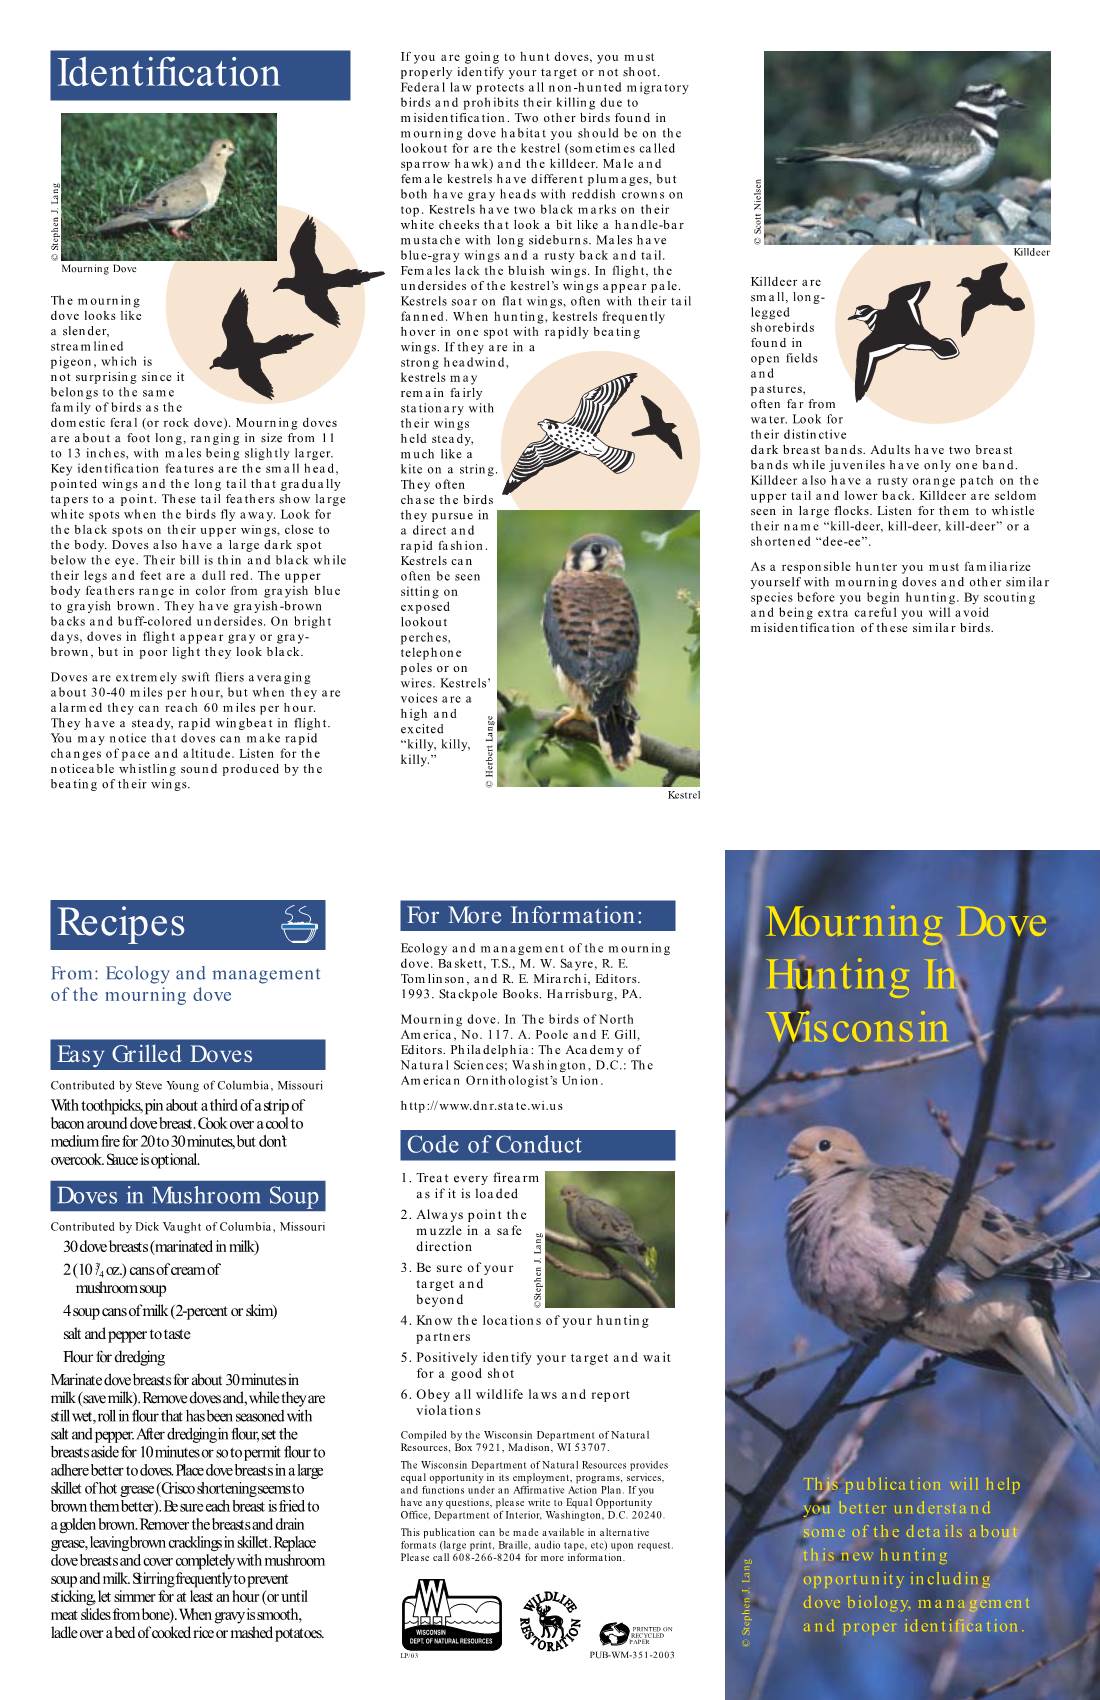 Mourning Dove Brochure